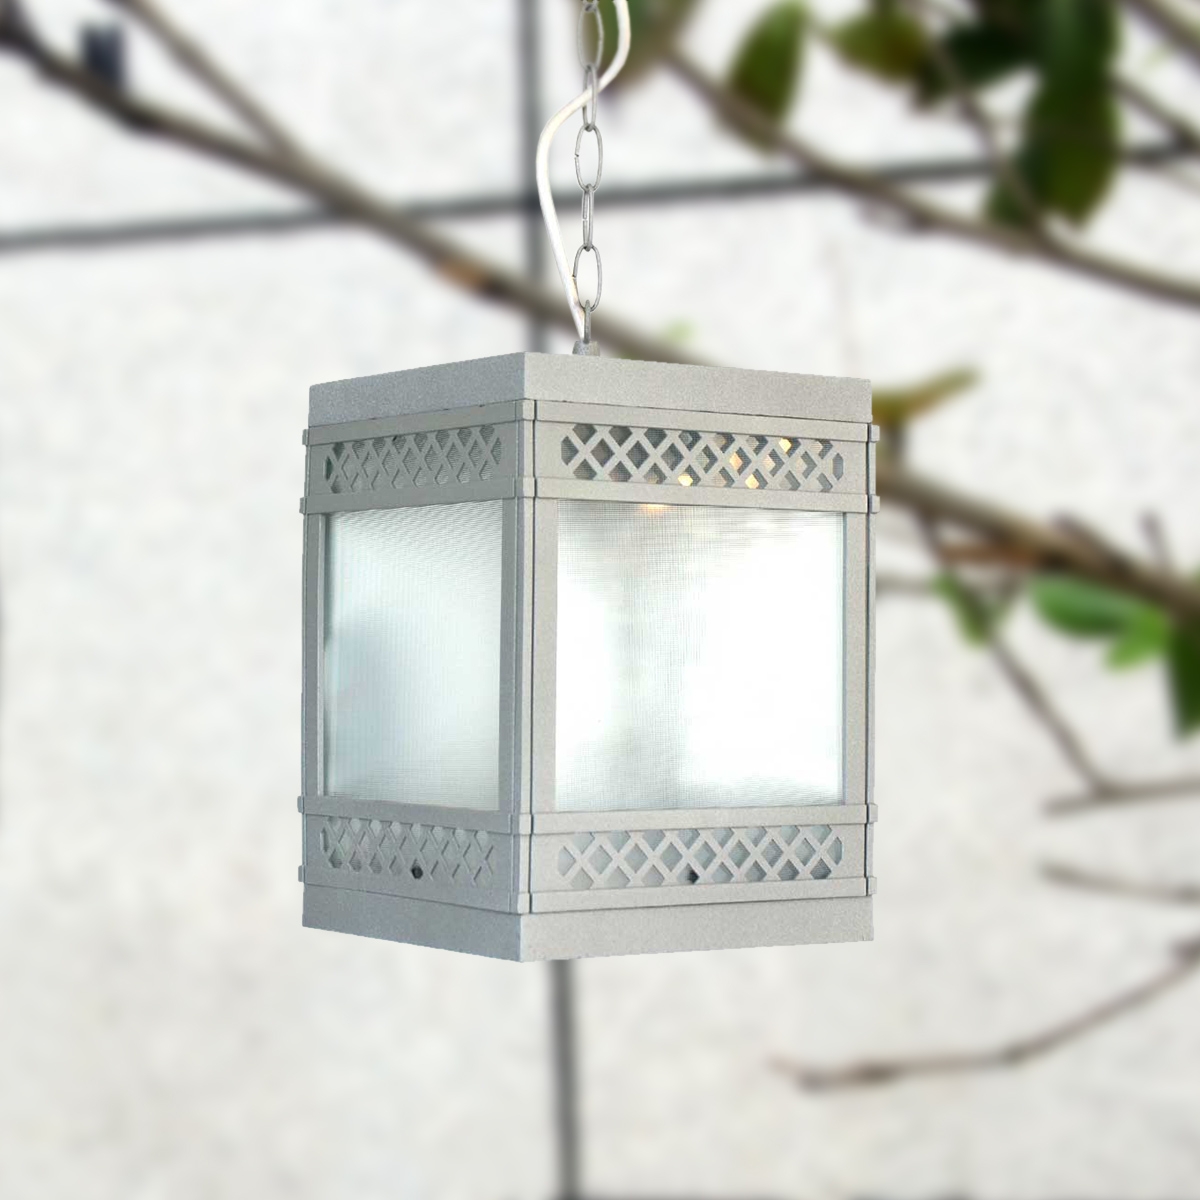 Outdoor Hanging Light 5505 - Silver